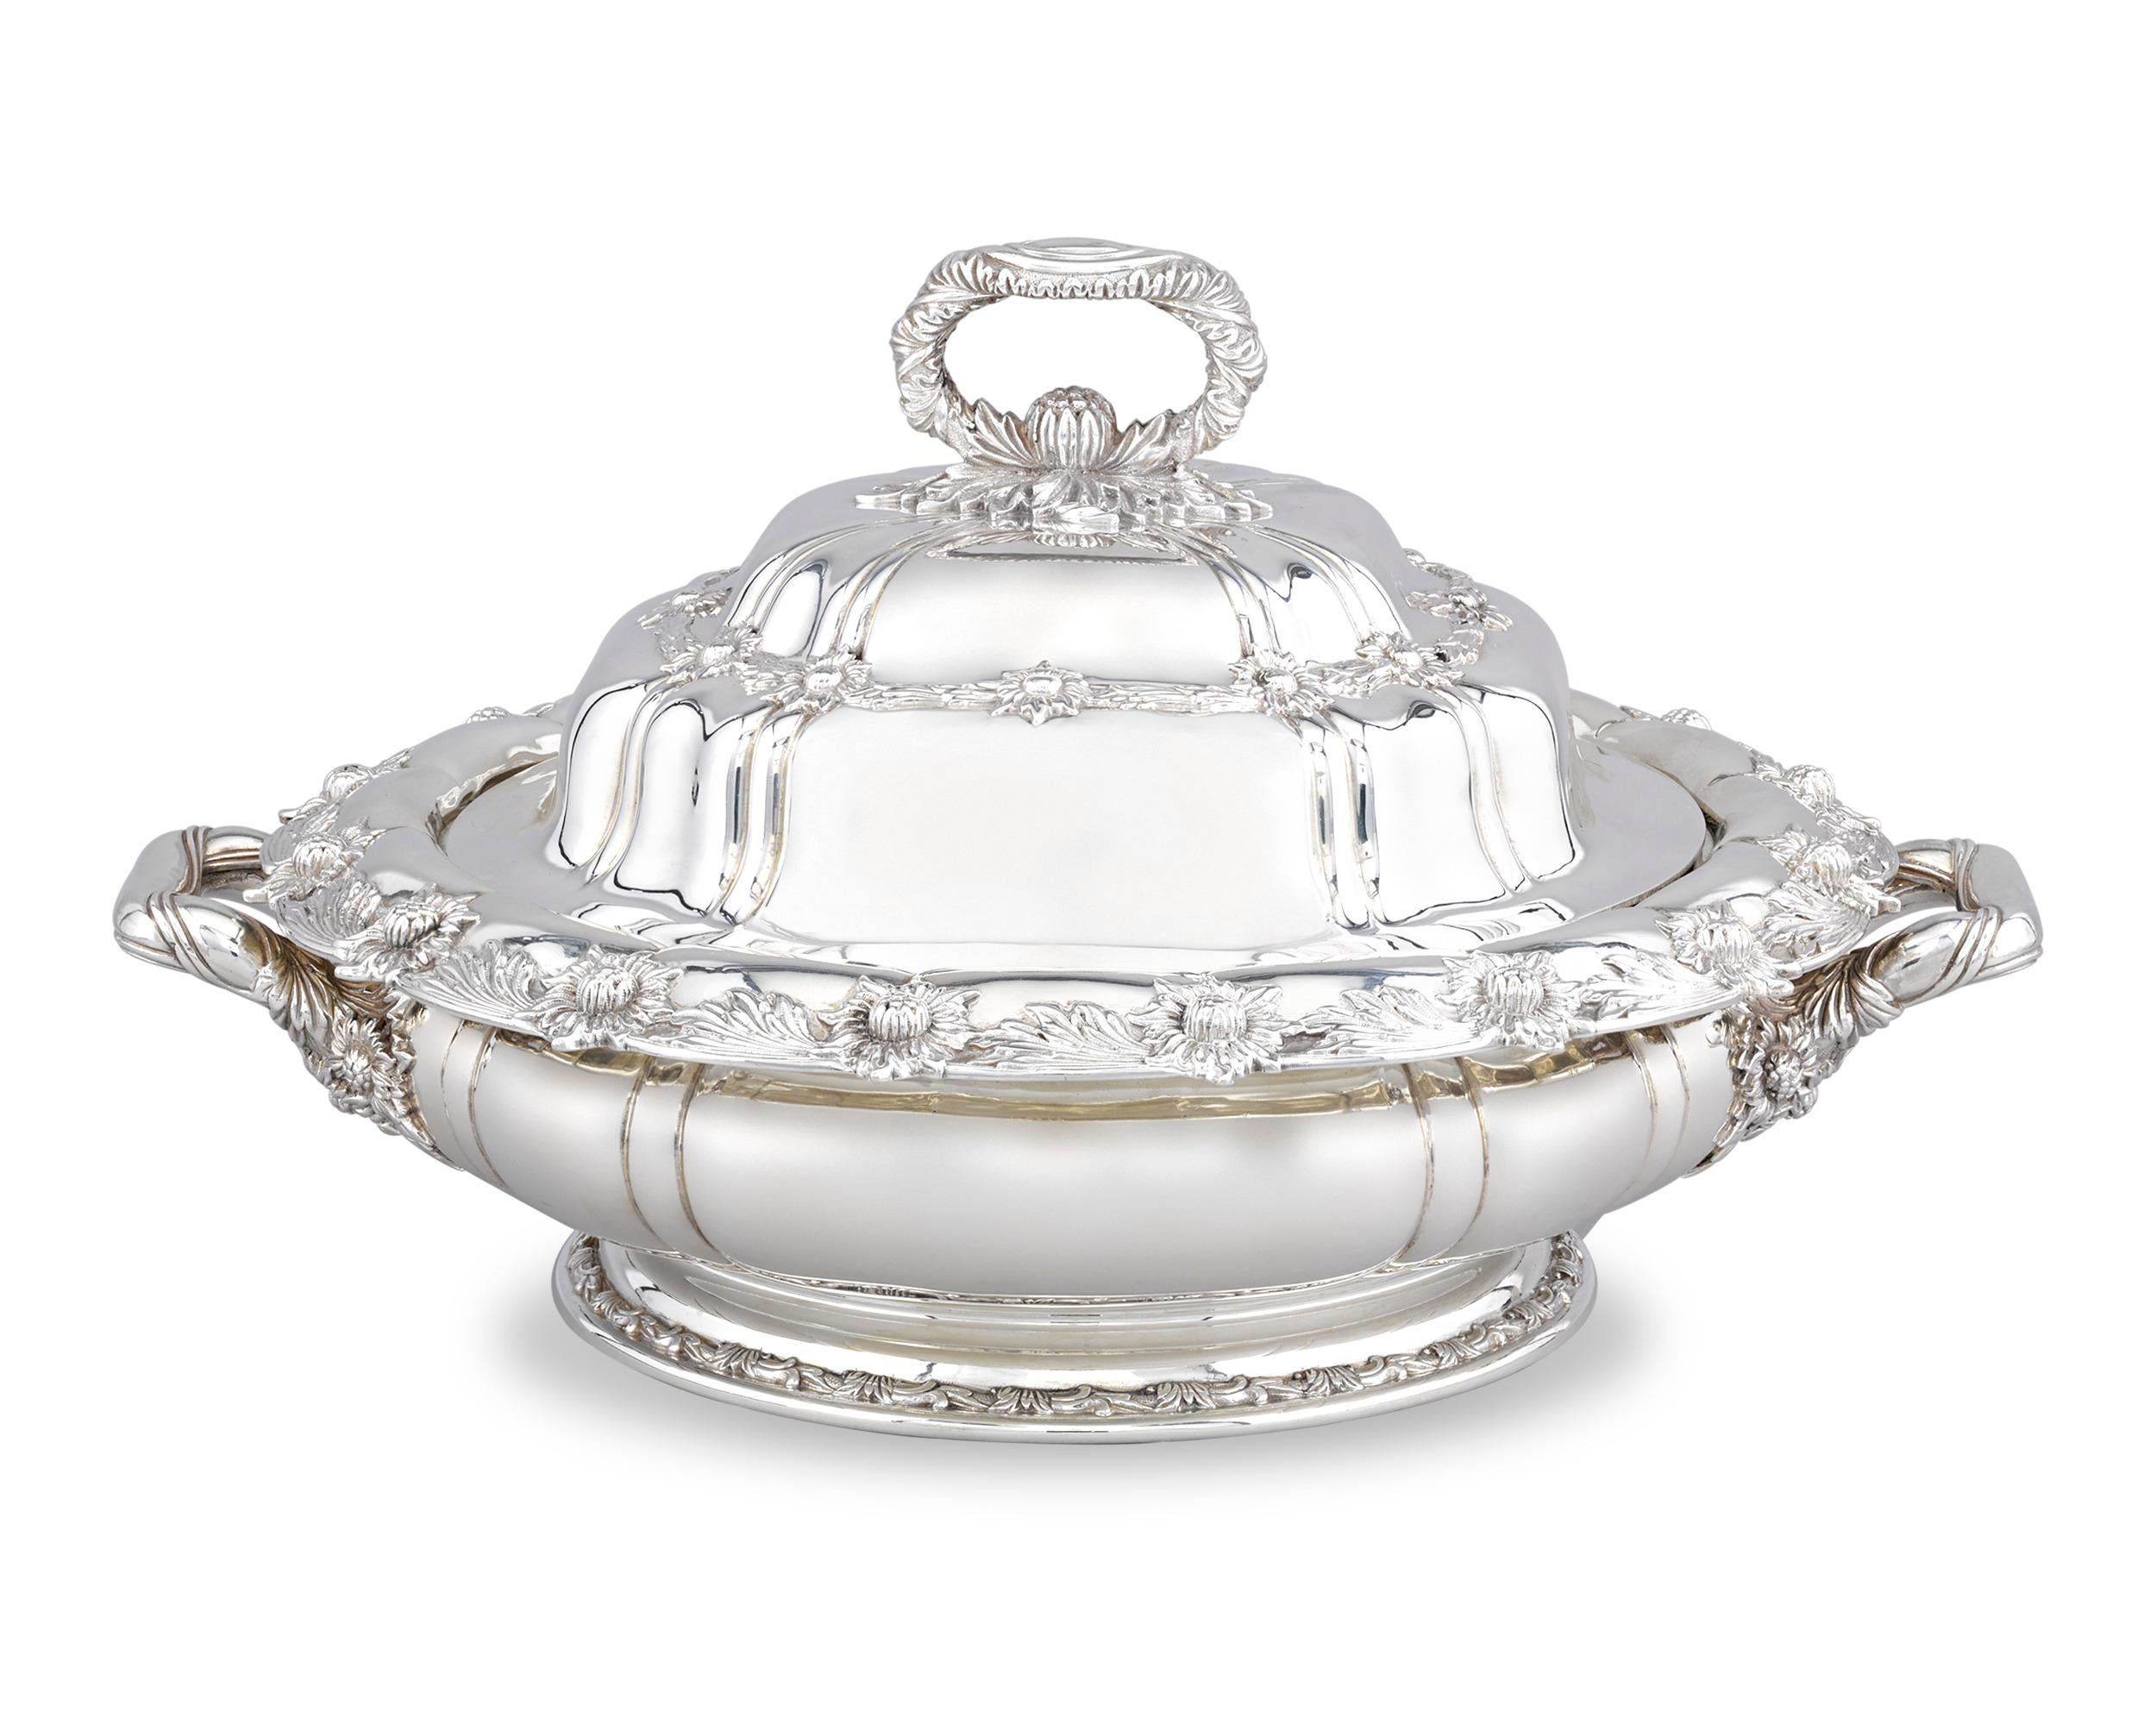 This magnificent covered sterling silver entrée dish by Tiffany & Co. is crafted in the iconic Chrysanthemum pattern, one of the best-loved and most desirable ever created by this renowned firm. Gloriously chased with intricately worked namesake